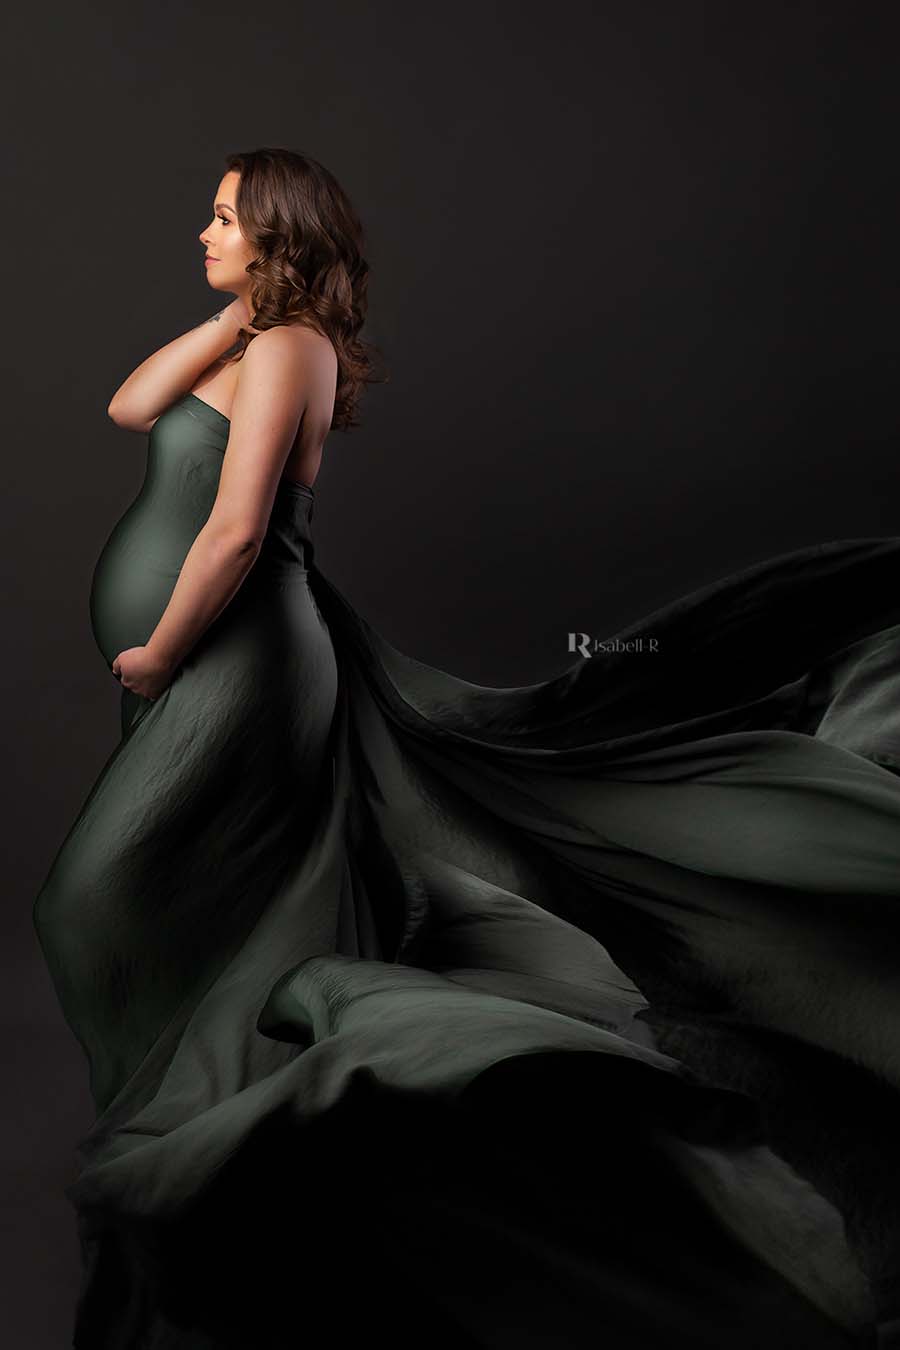 model poses on her side with her eyes open touching her neck and holding her bump with the other hand. she is wearing a long silky draping fabric that is covering her body,